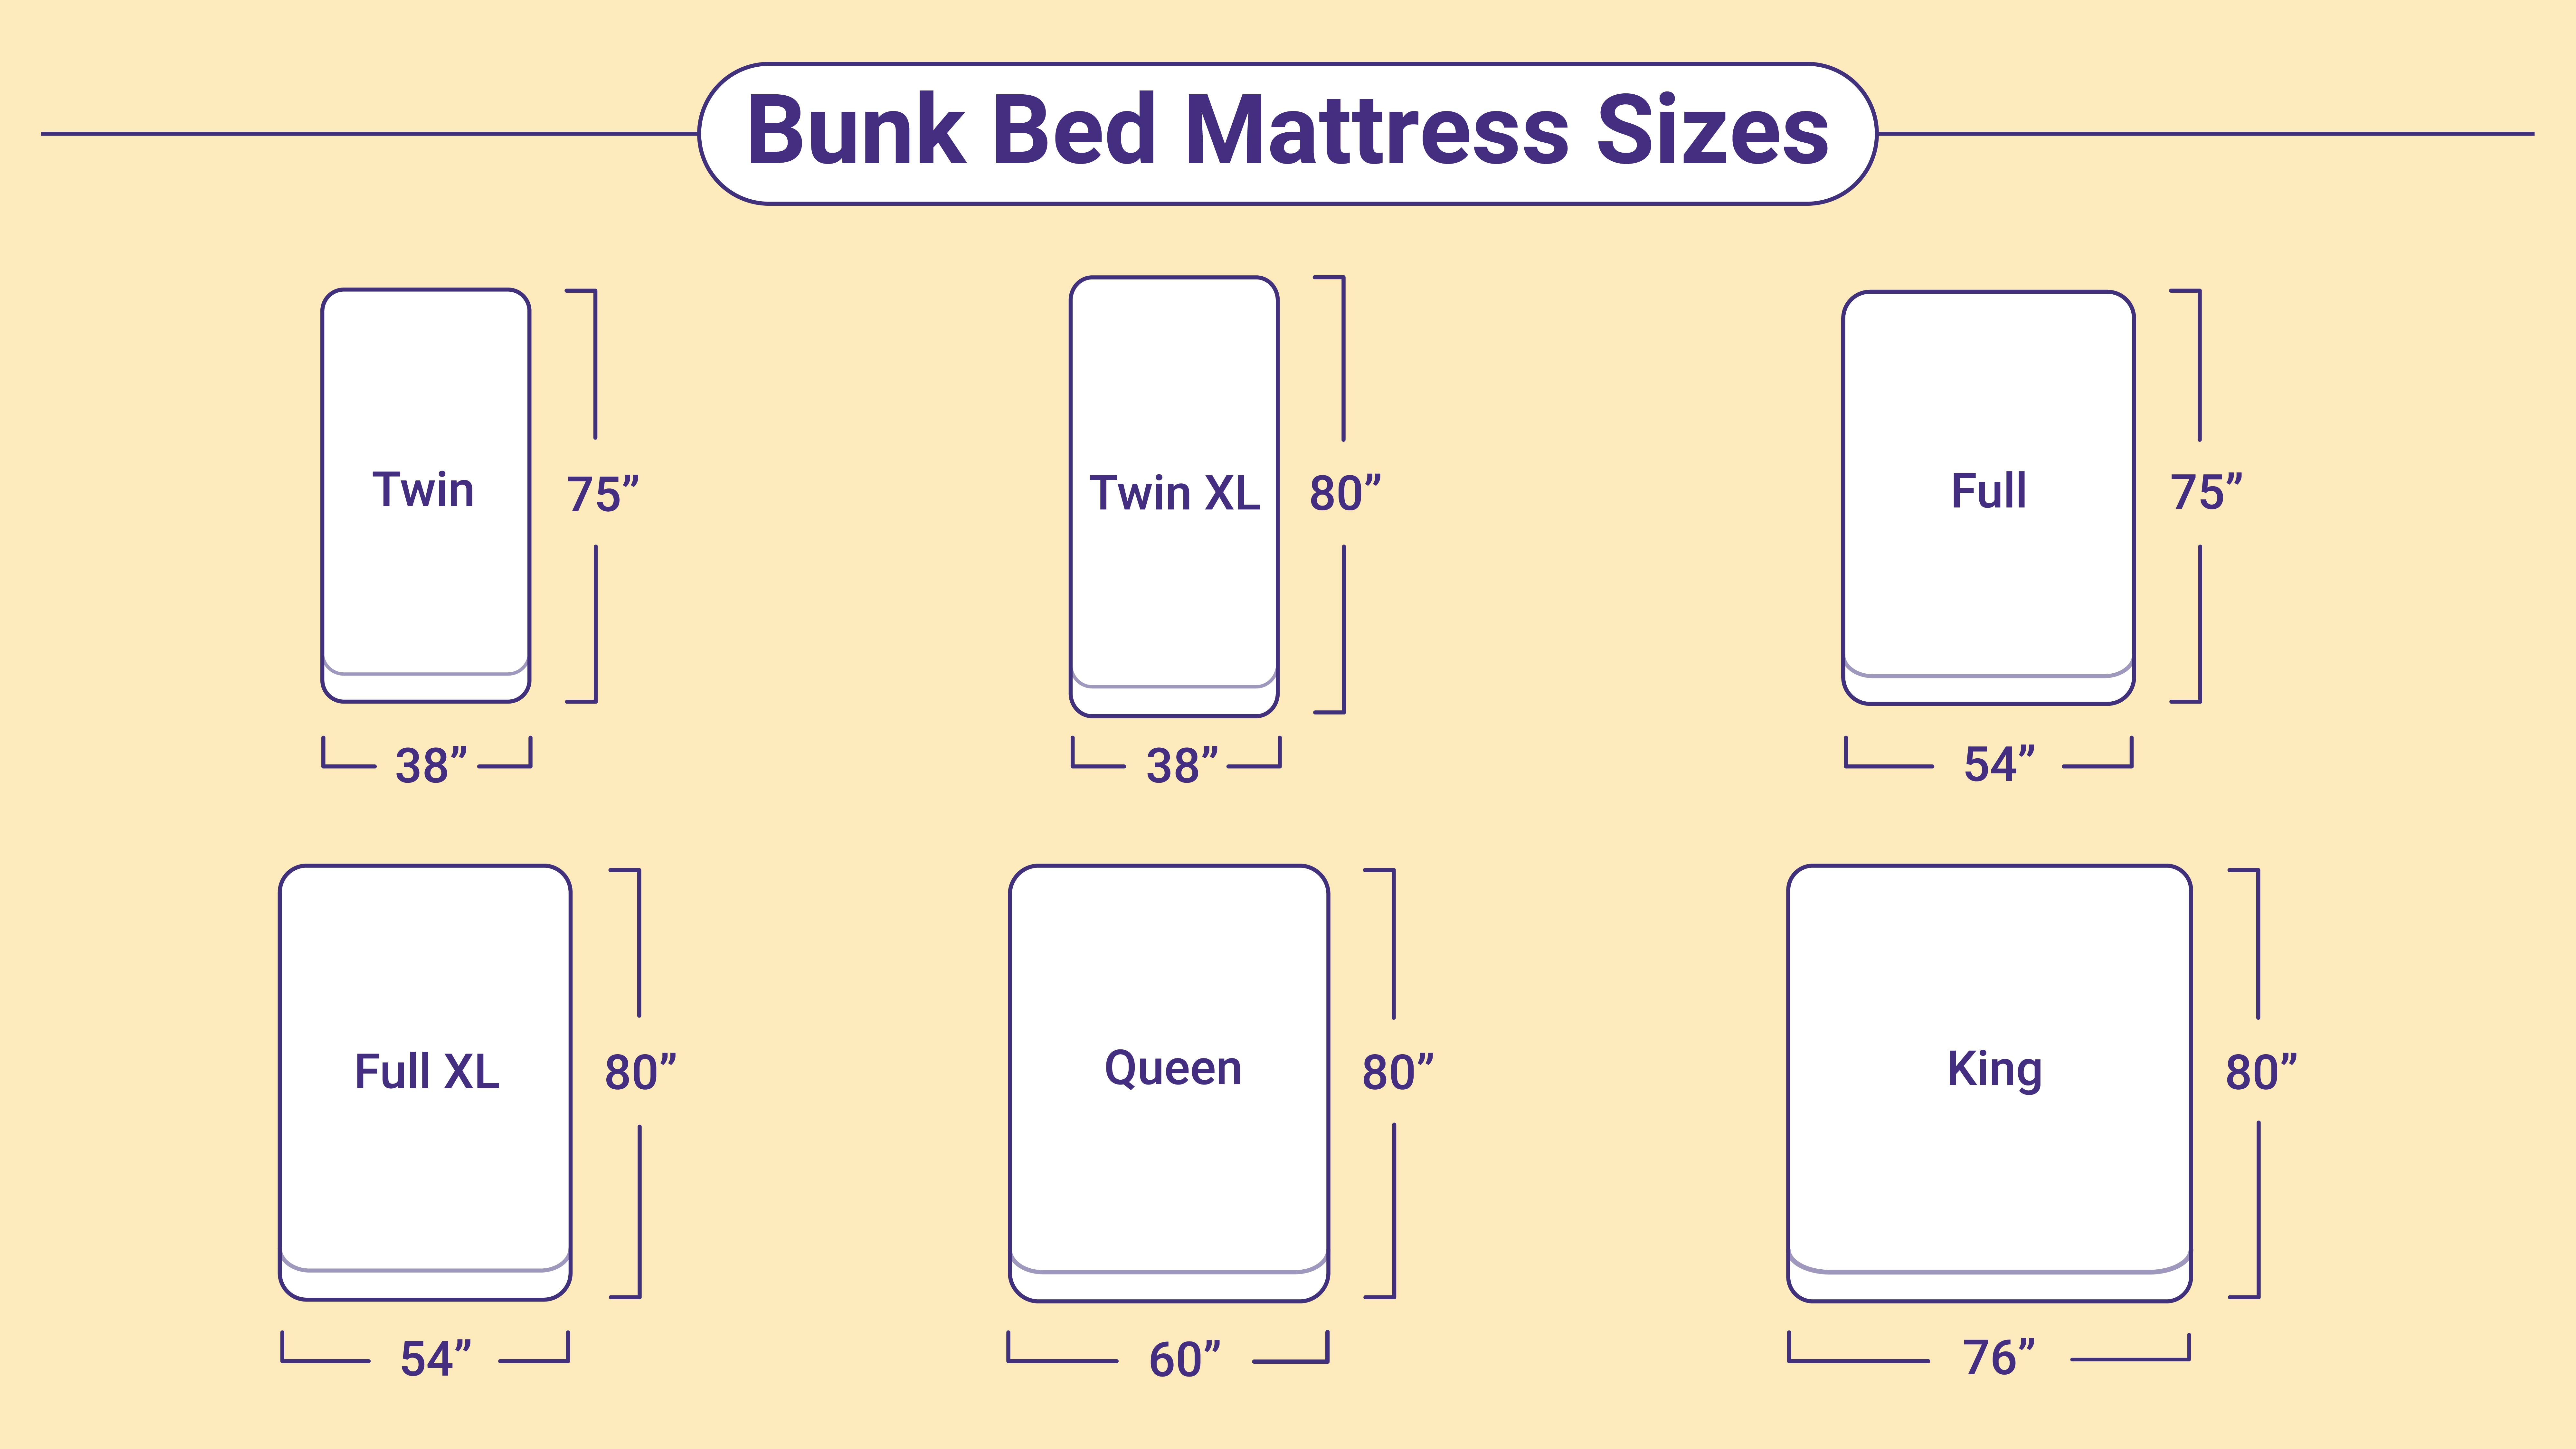 Bunk Bed Mattress Sizes And Dimensions, Twin Xl Bunk Bed Dimensions